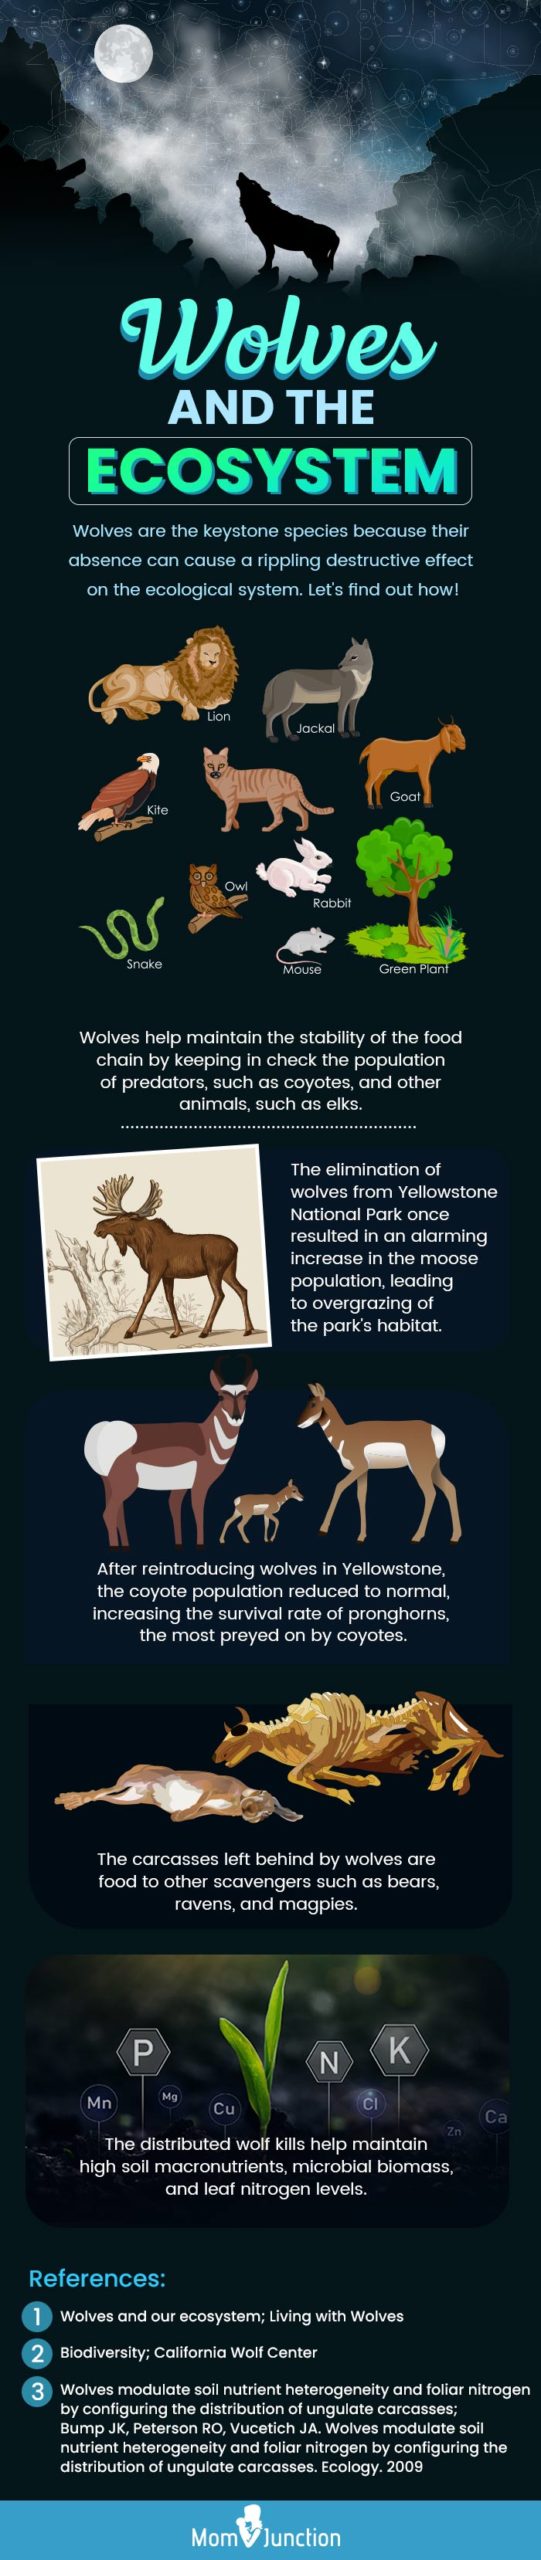 wolves and the ecosystem (infographic)